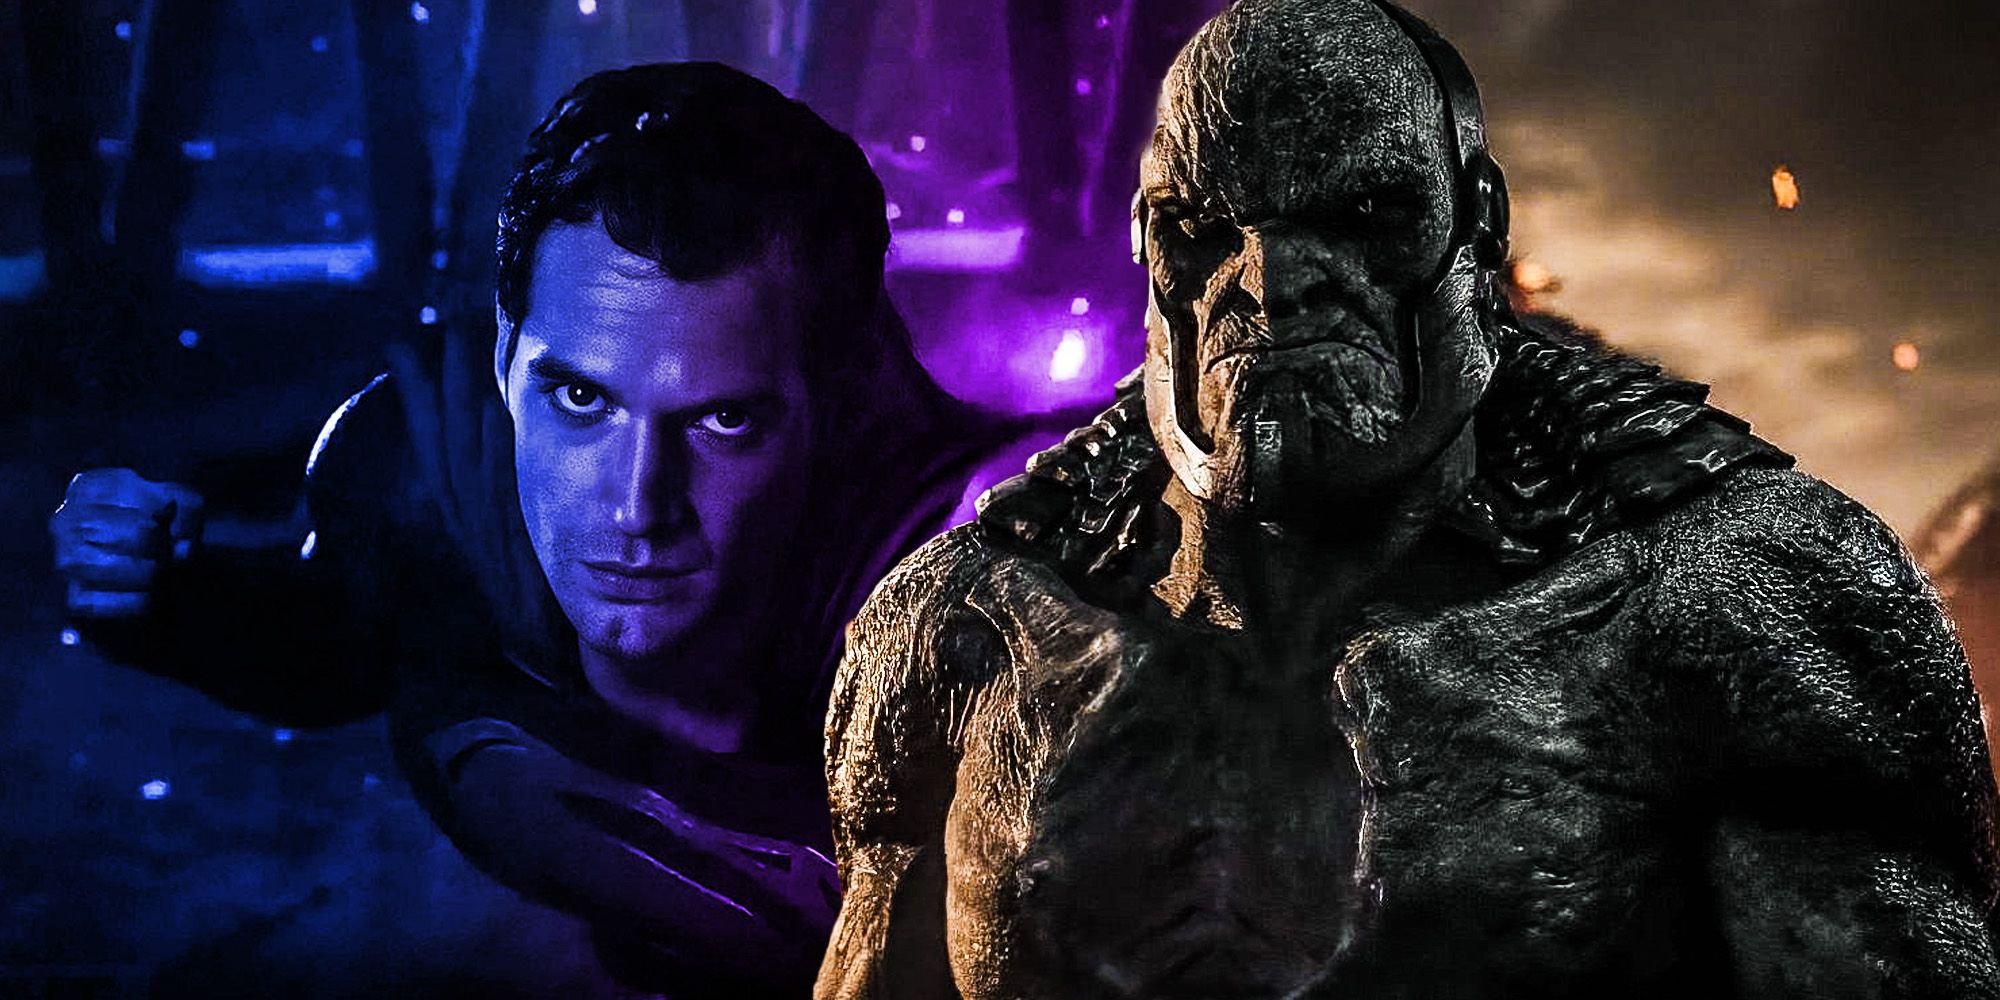 Superman vs Darkseid Who Is More Powerful In Snyders Justice League